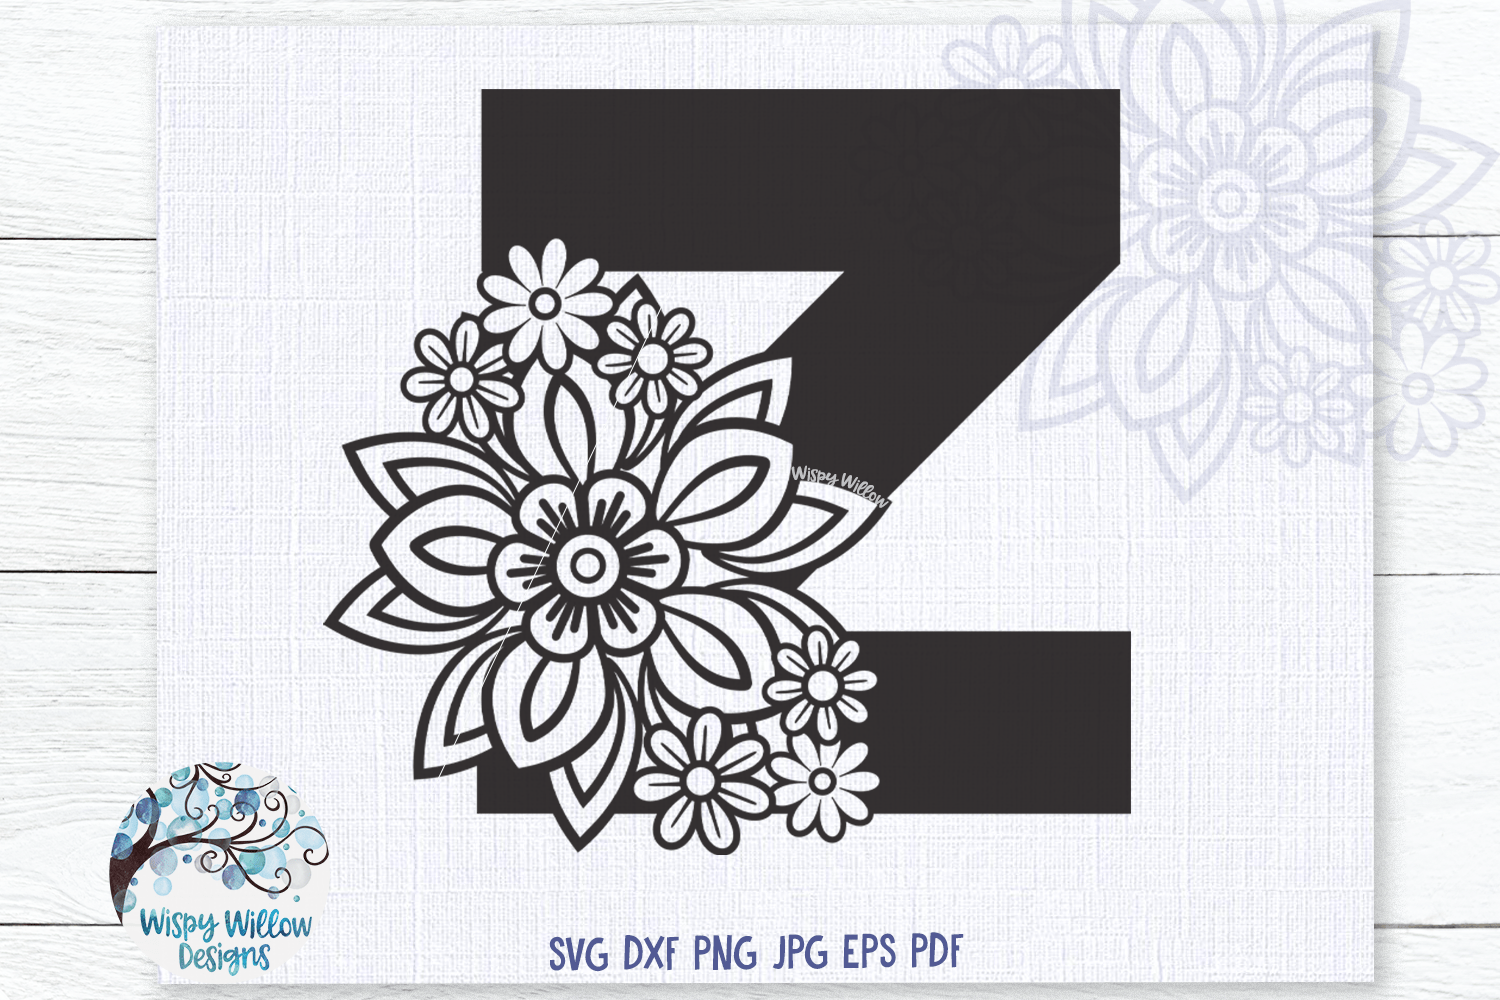 Floral Letter Z SVG Wispy Willow Designs Company